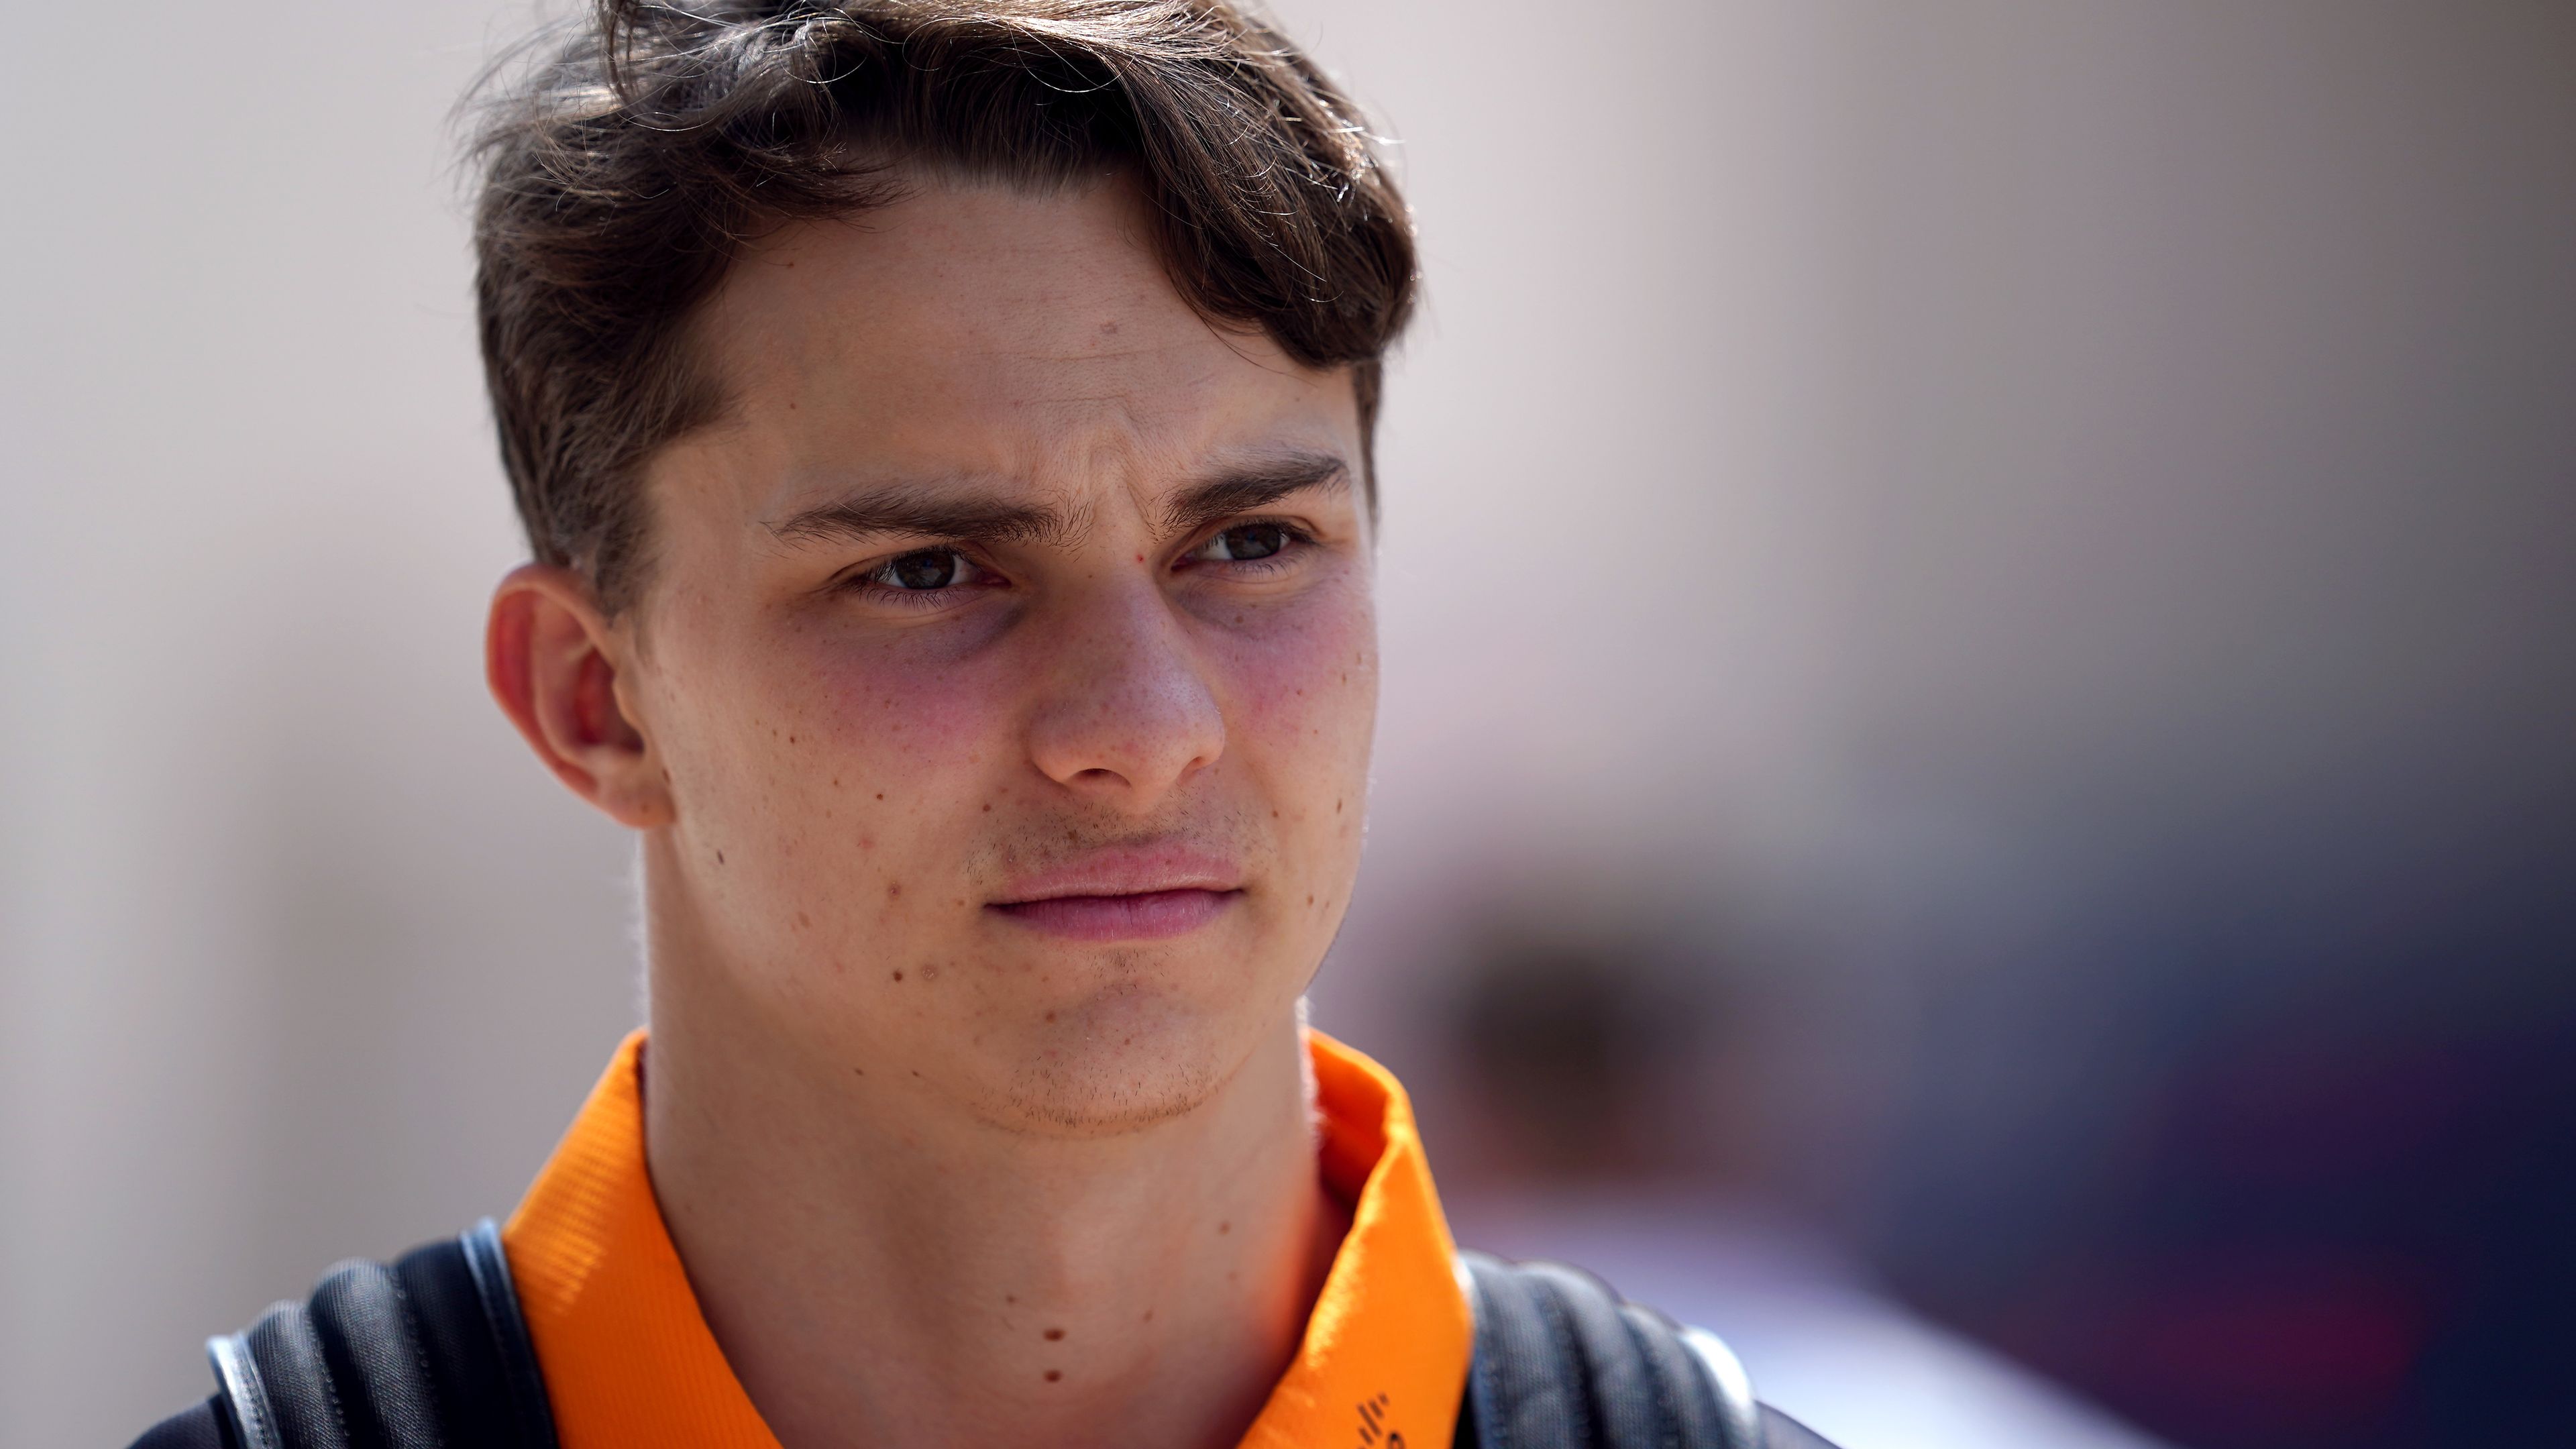 Oscar Piastri signed with McLaren for the 2023 season having been an Alpine driver for three years.